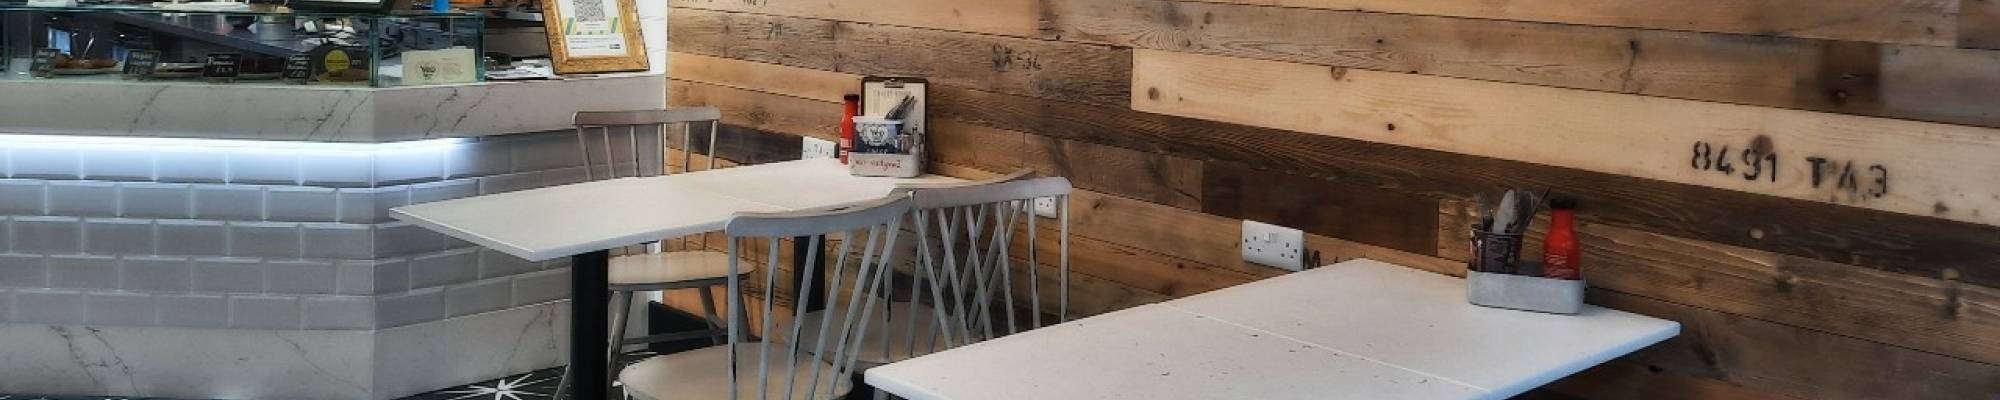 Yeo Valley Café Recycled Tables